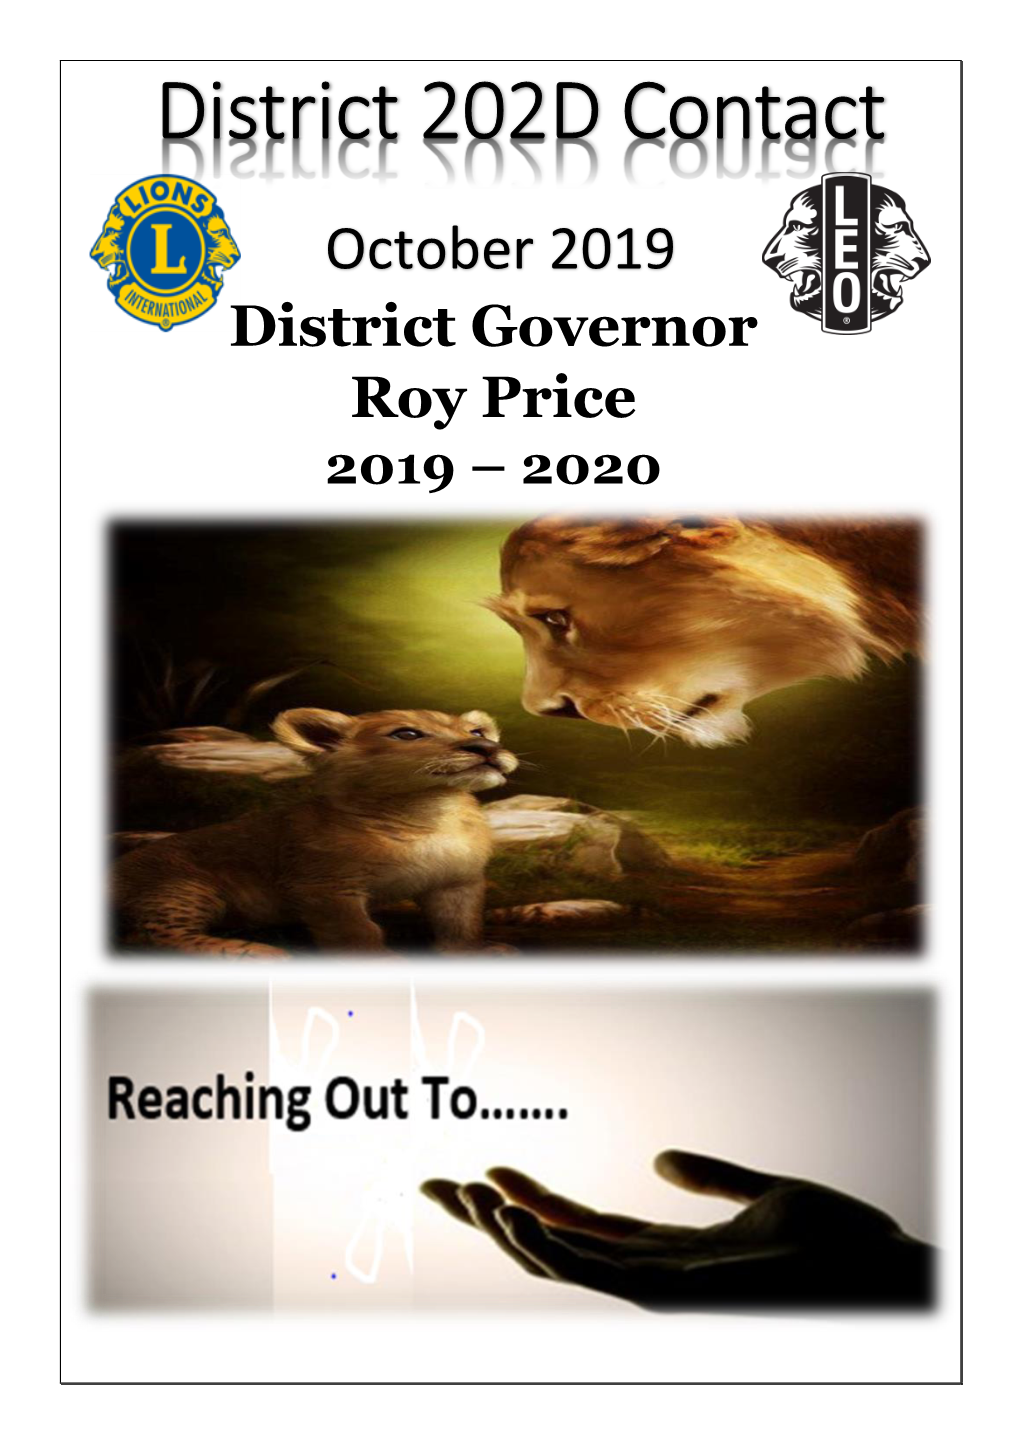 District 202D Contact October 2019 District Governor Roy Price 2019 – 2020